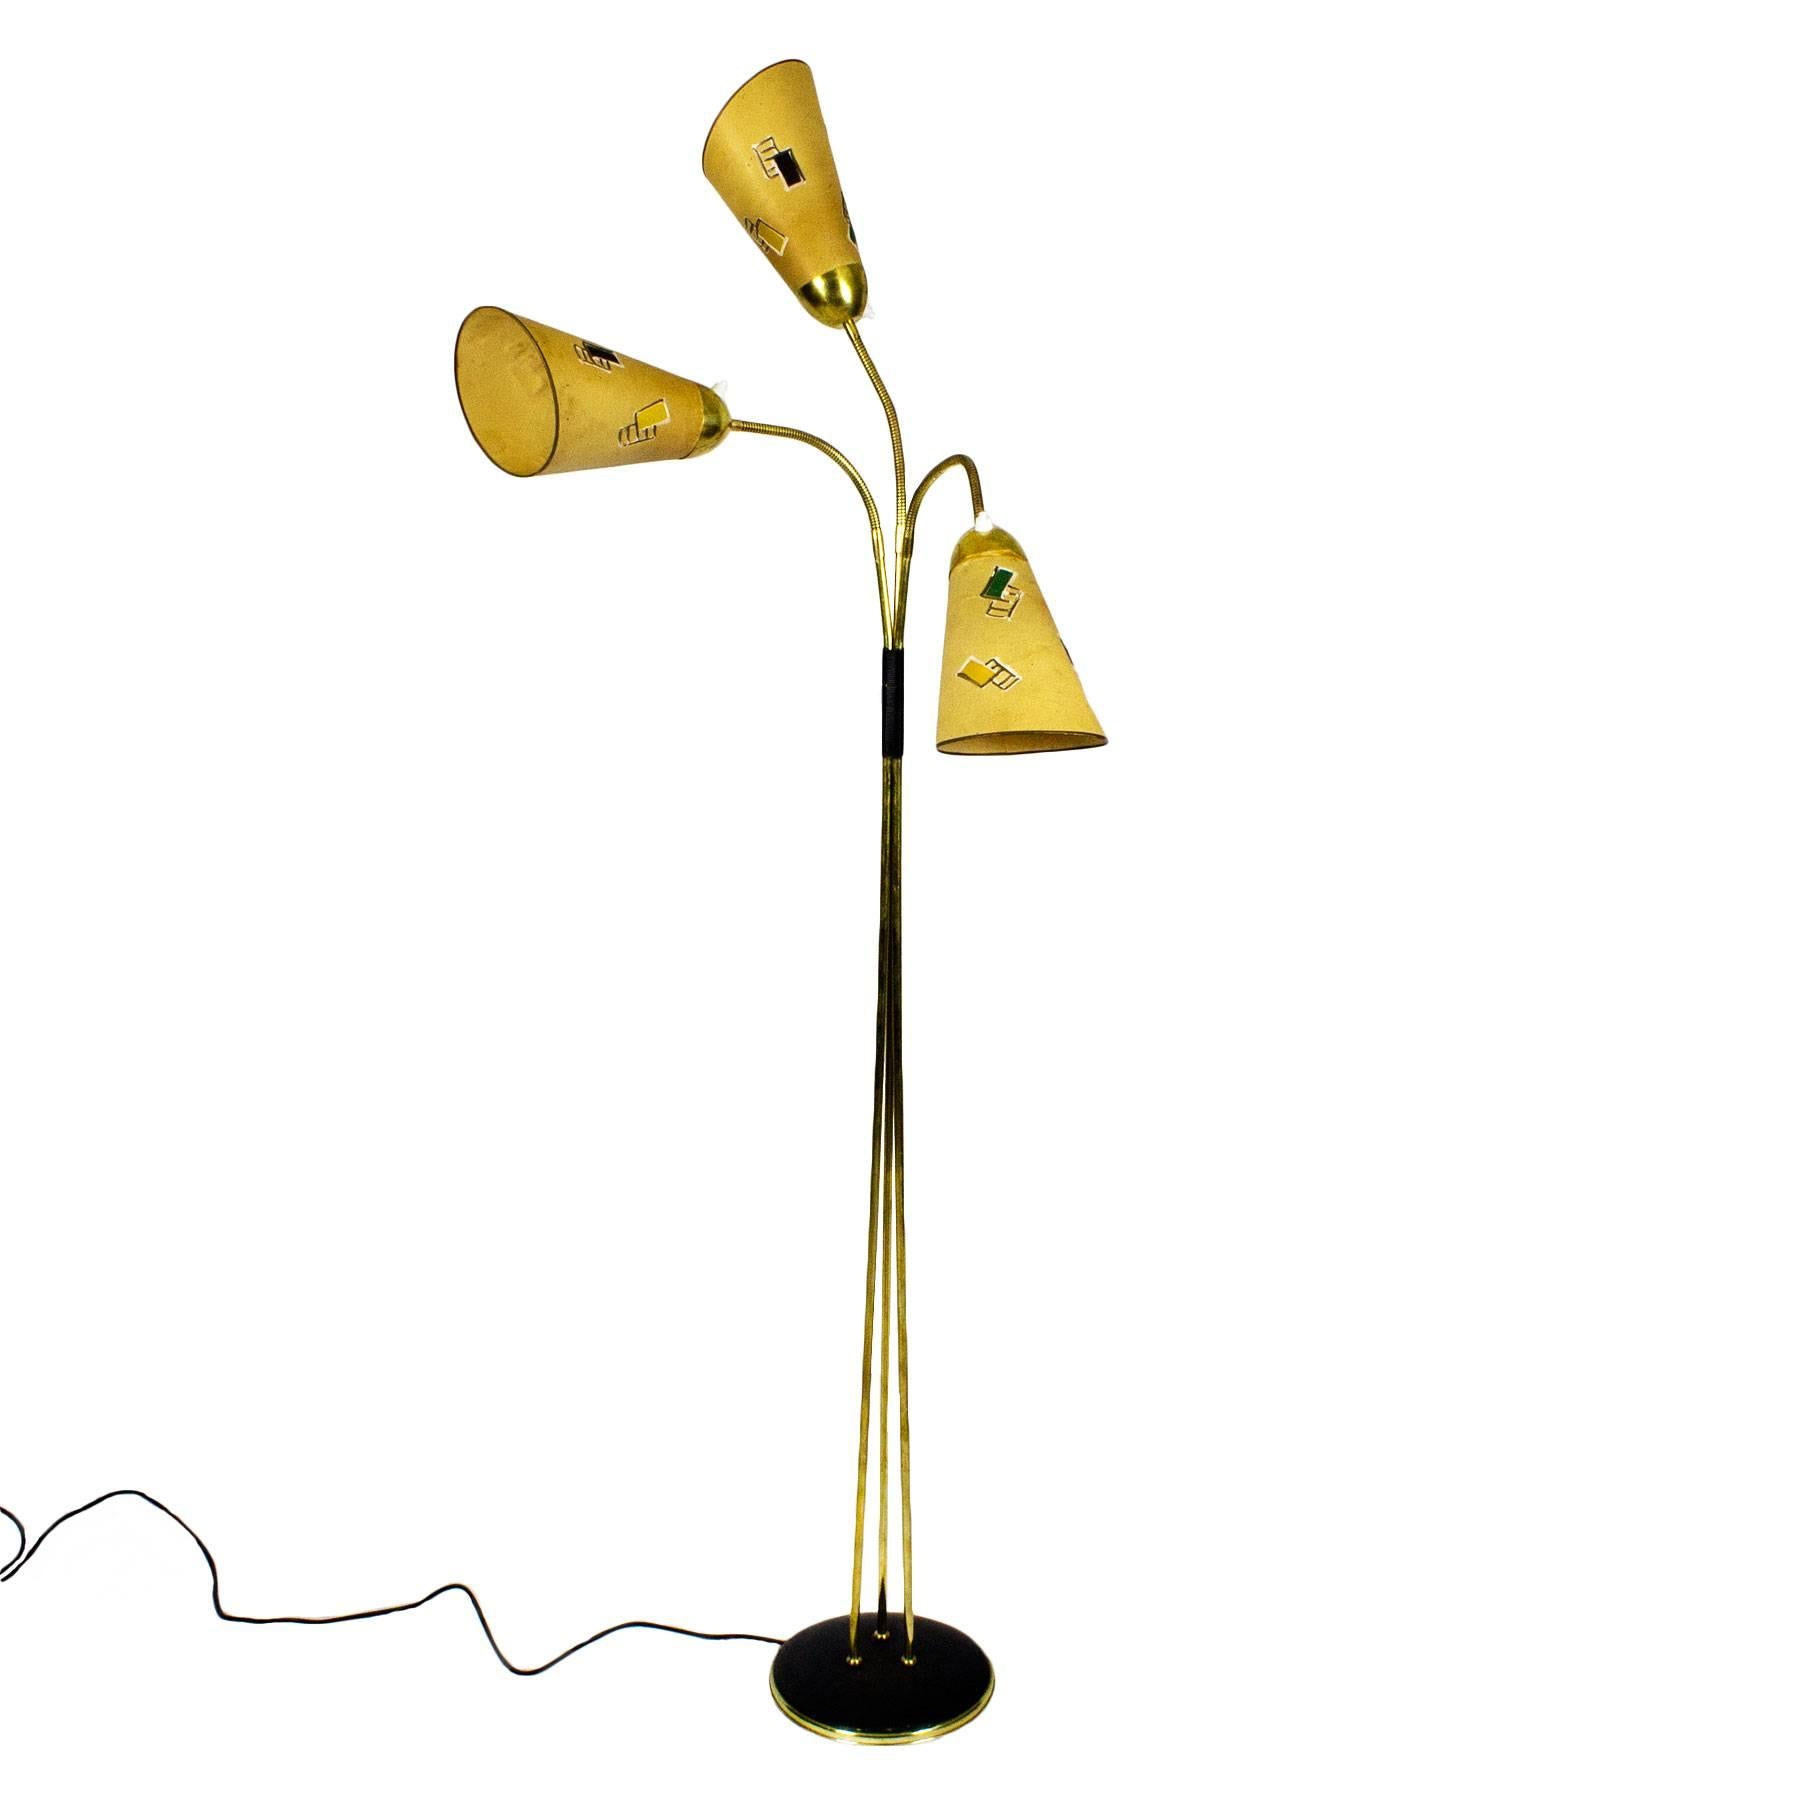 Tripod standing lamp, polished brass, black lacquered steel base, plastified black lace decoration. Three flexible arms with the originals paper (simil parchment) lampshades with relief hand painting patterns (one had been restored. Individual